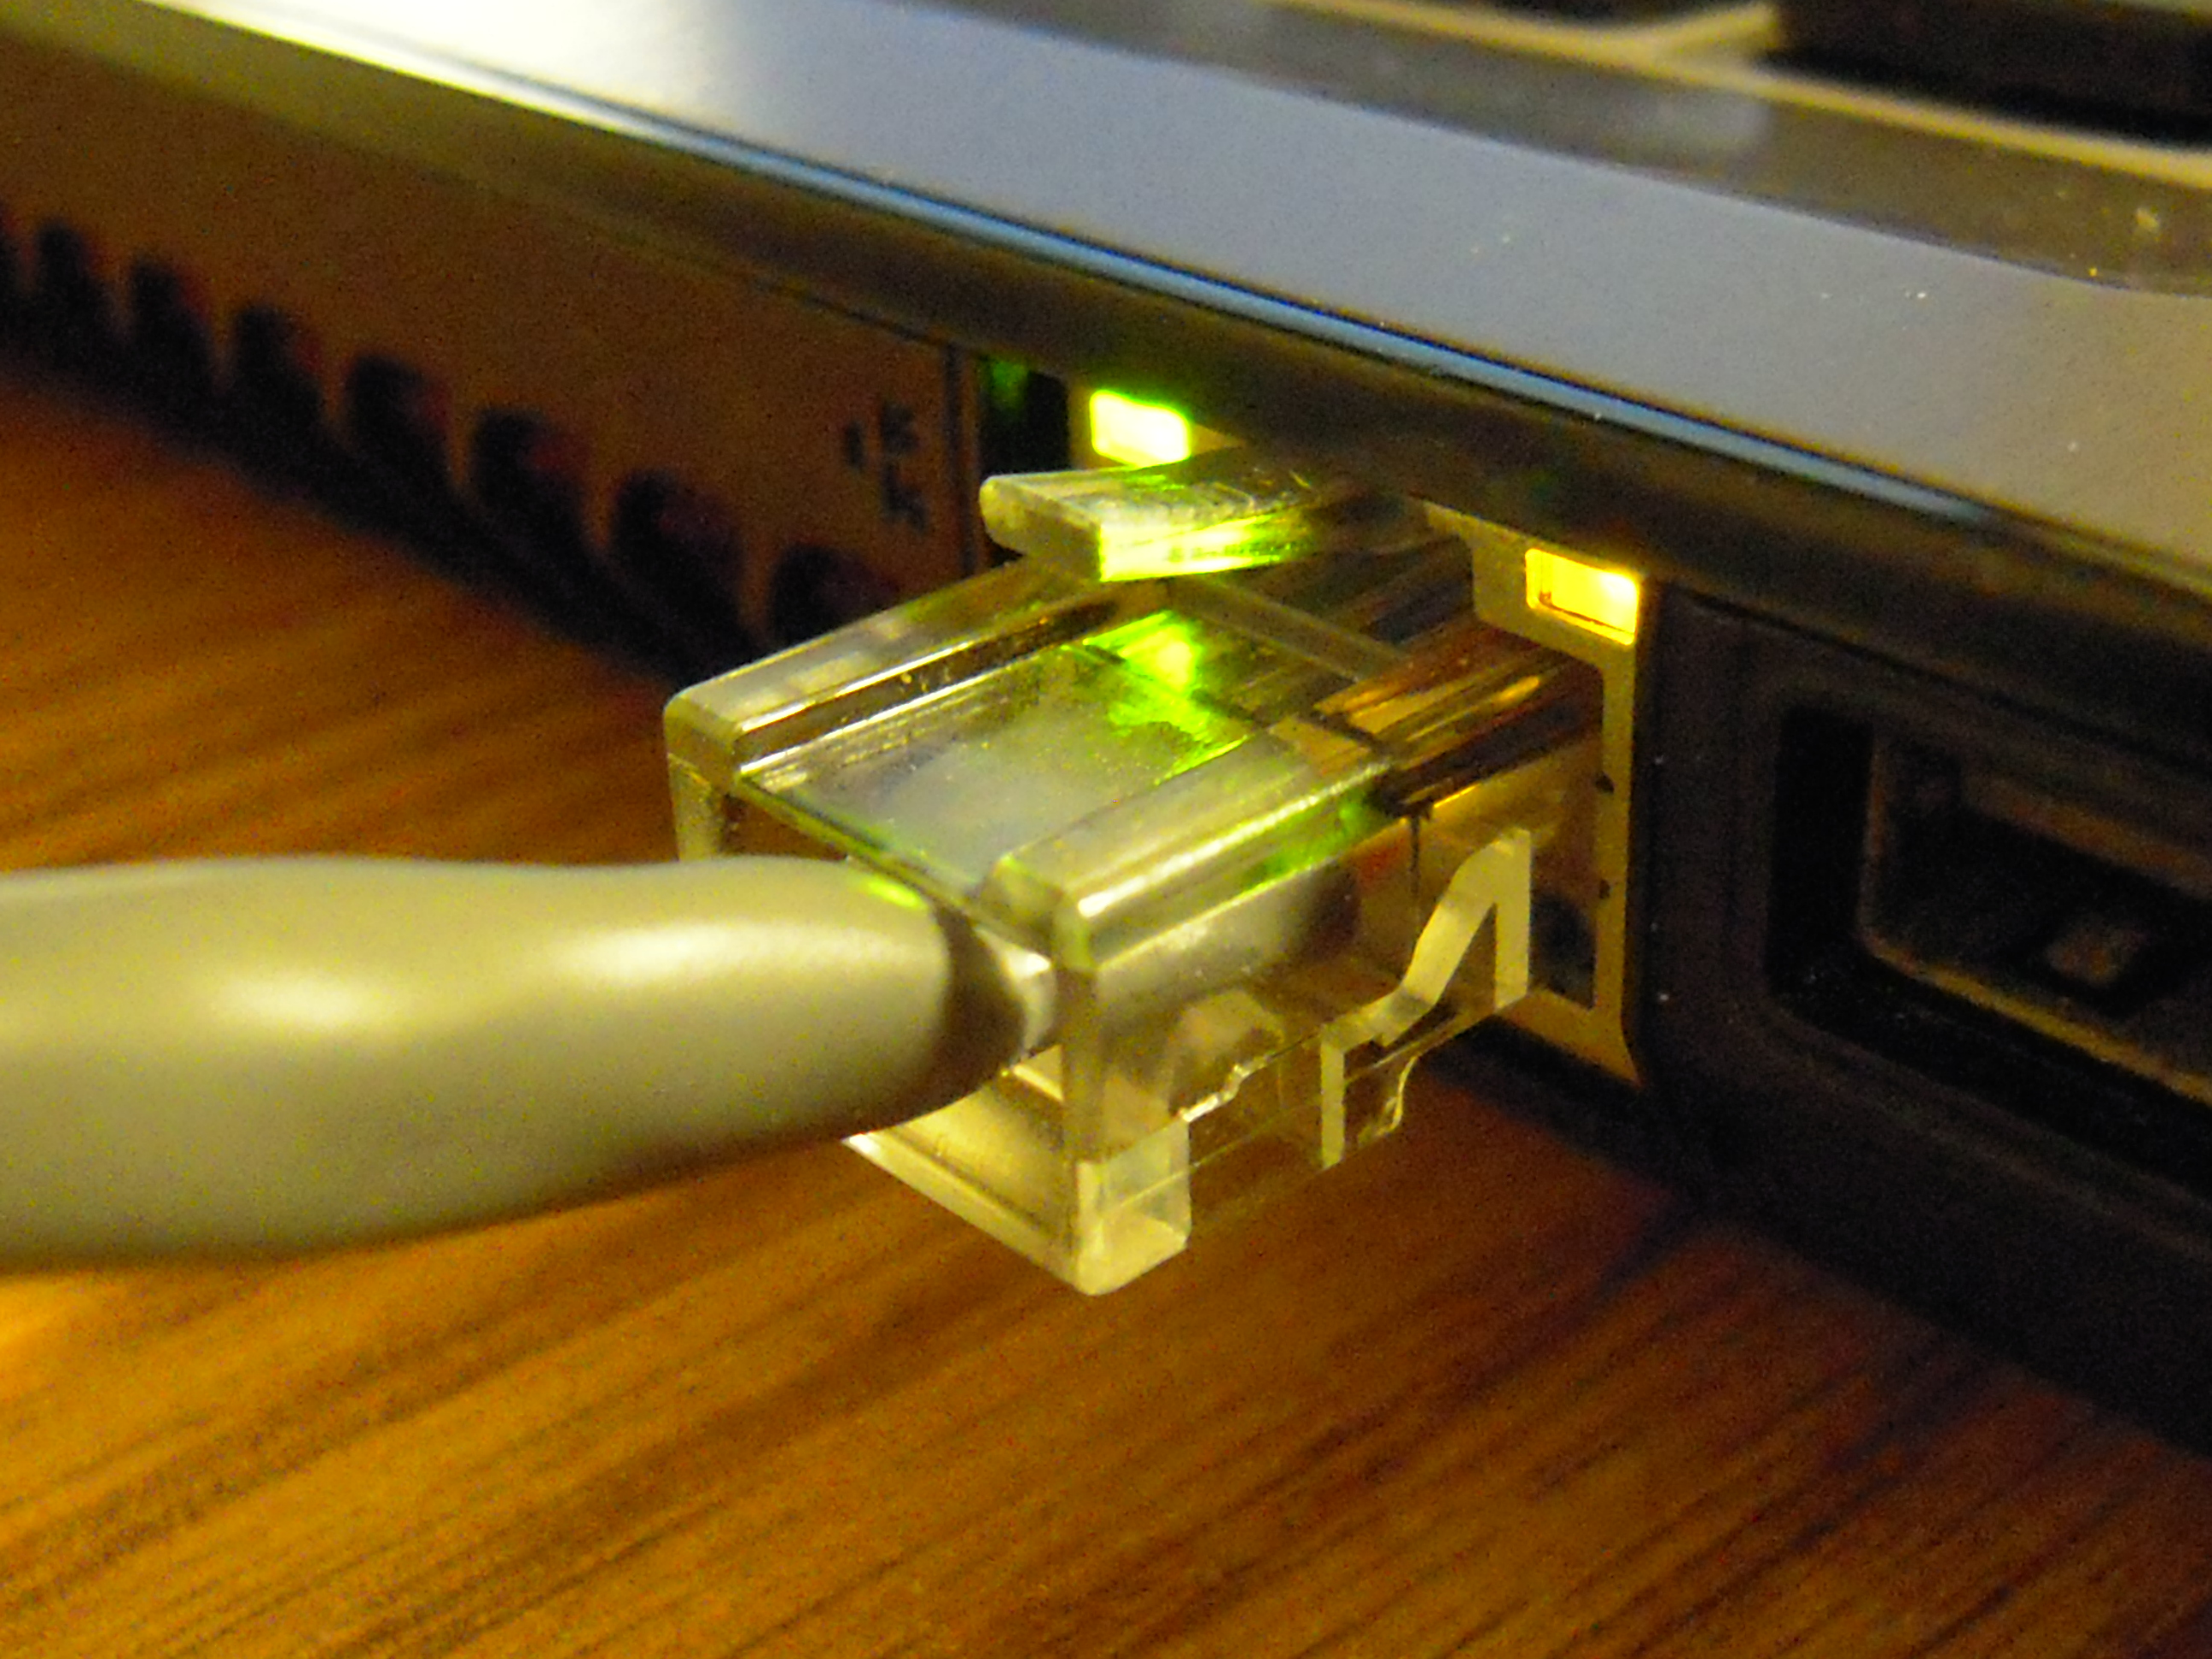 Ensure that the USB or Ethernet cable is securely connected to both the printer and the computer.
If using a wireless printer, verify that it is connected to the Wi-Fi network and the signal strength is strong.